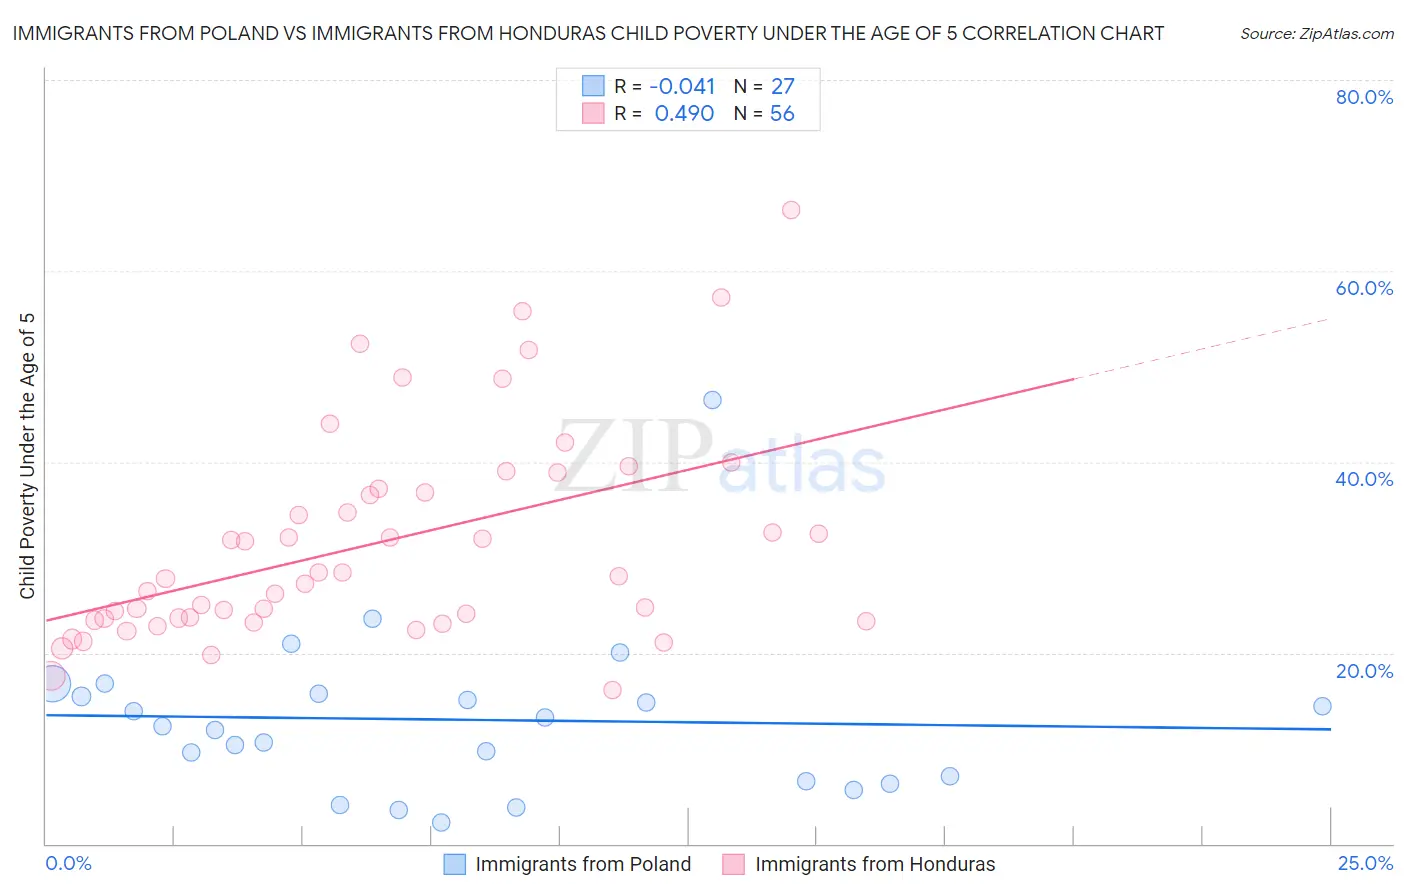 Immigrants from Poland vs Immigrants from Honduras Child Poverty Under the Age of 5